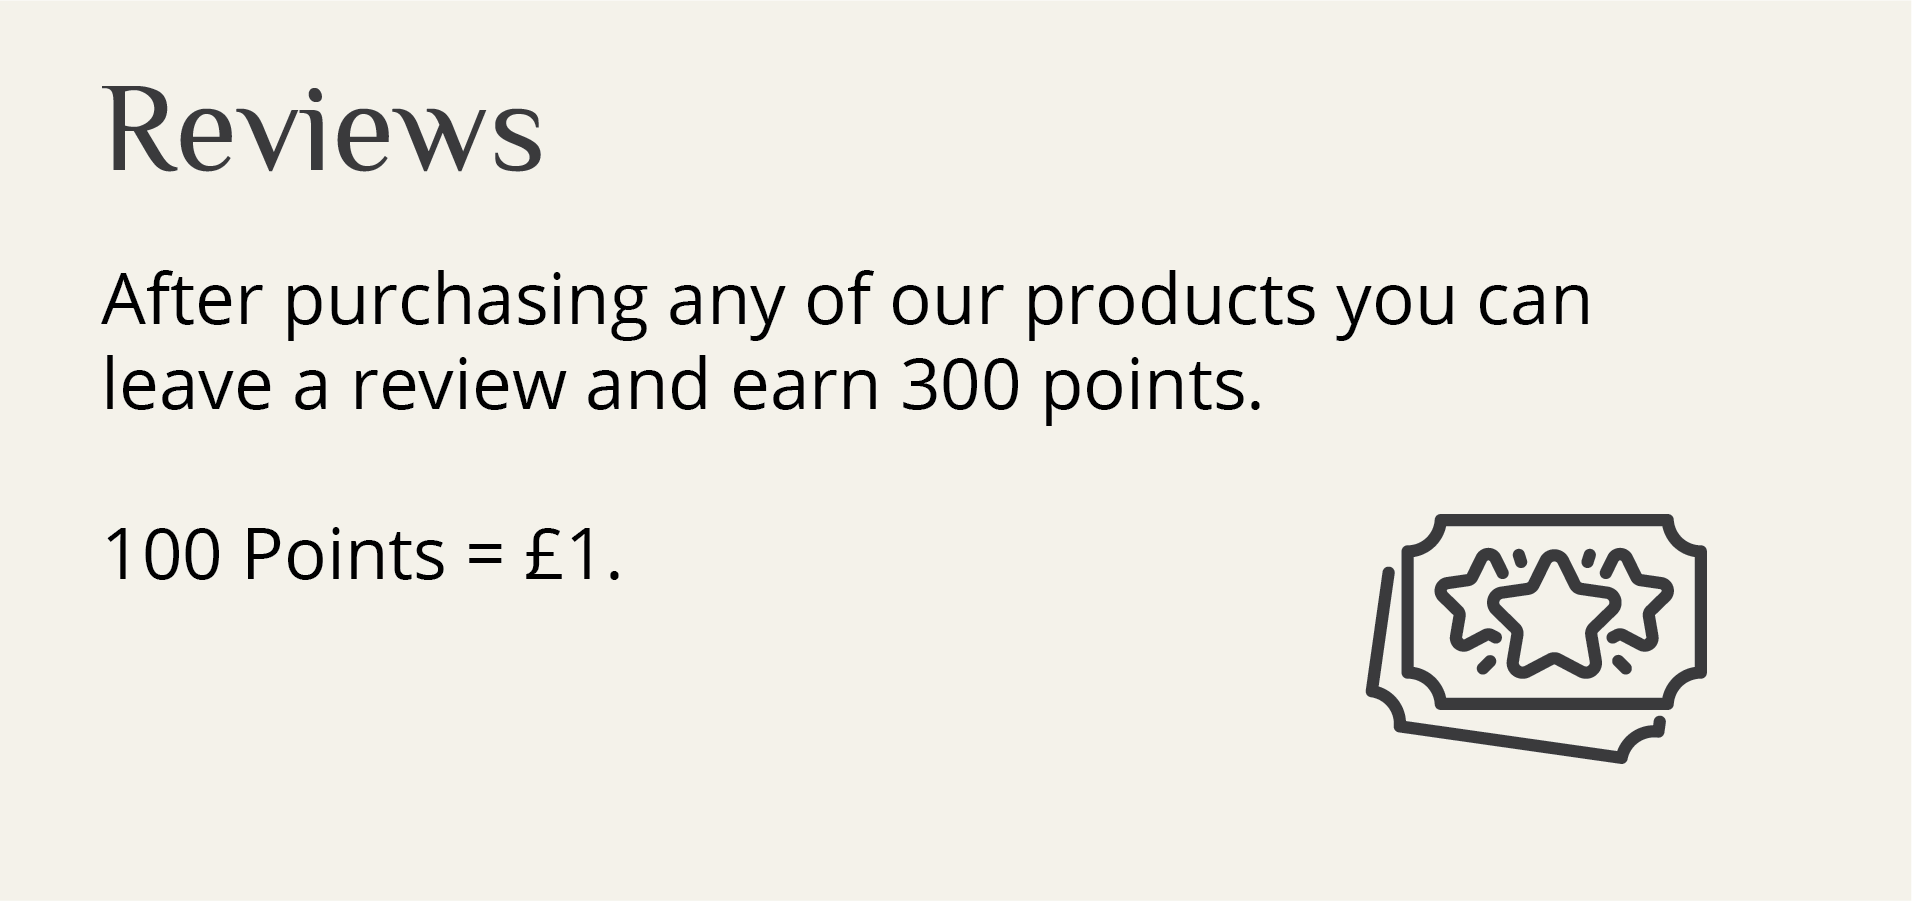 review after purchasing any of our products you can leave a review and earn 300 points.